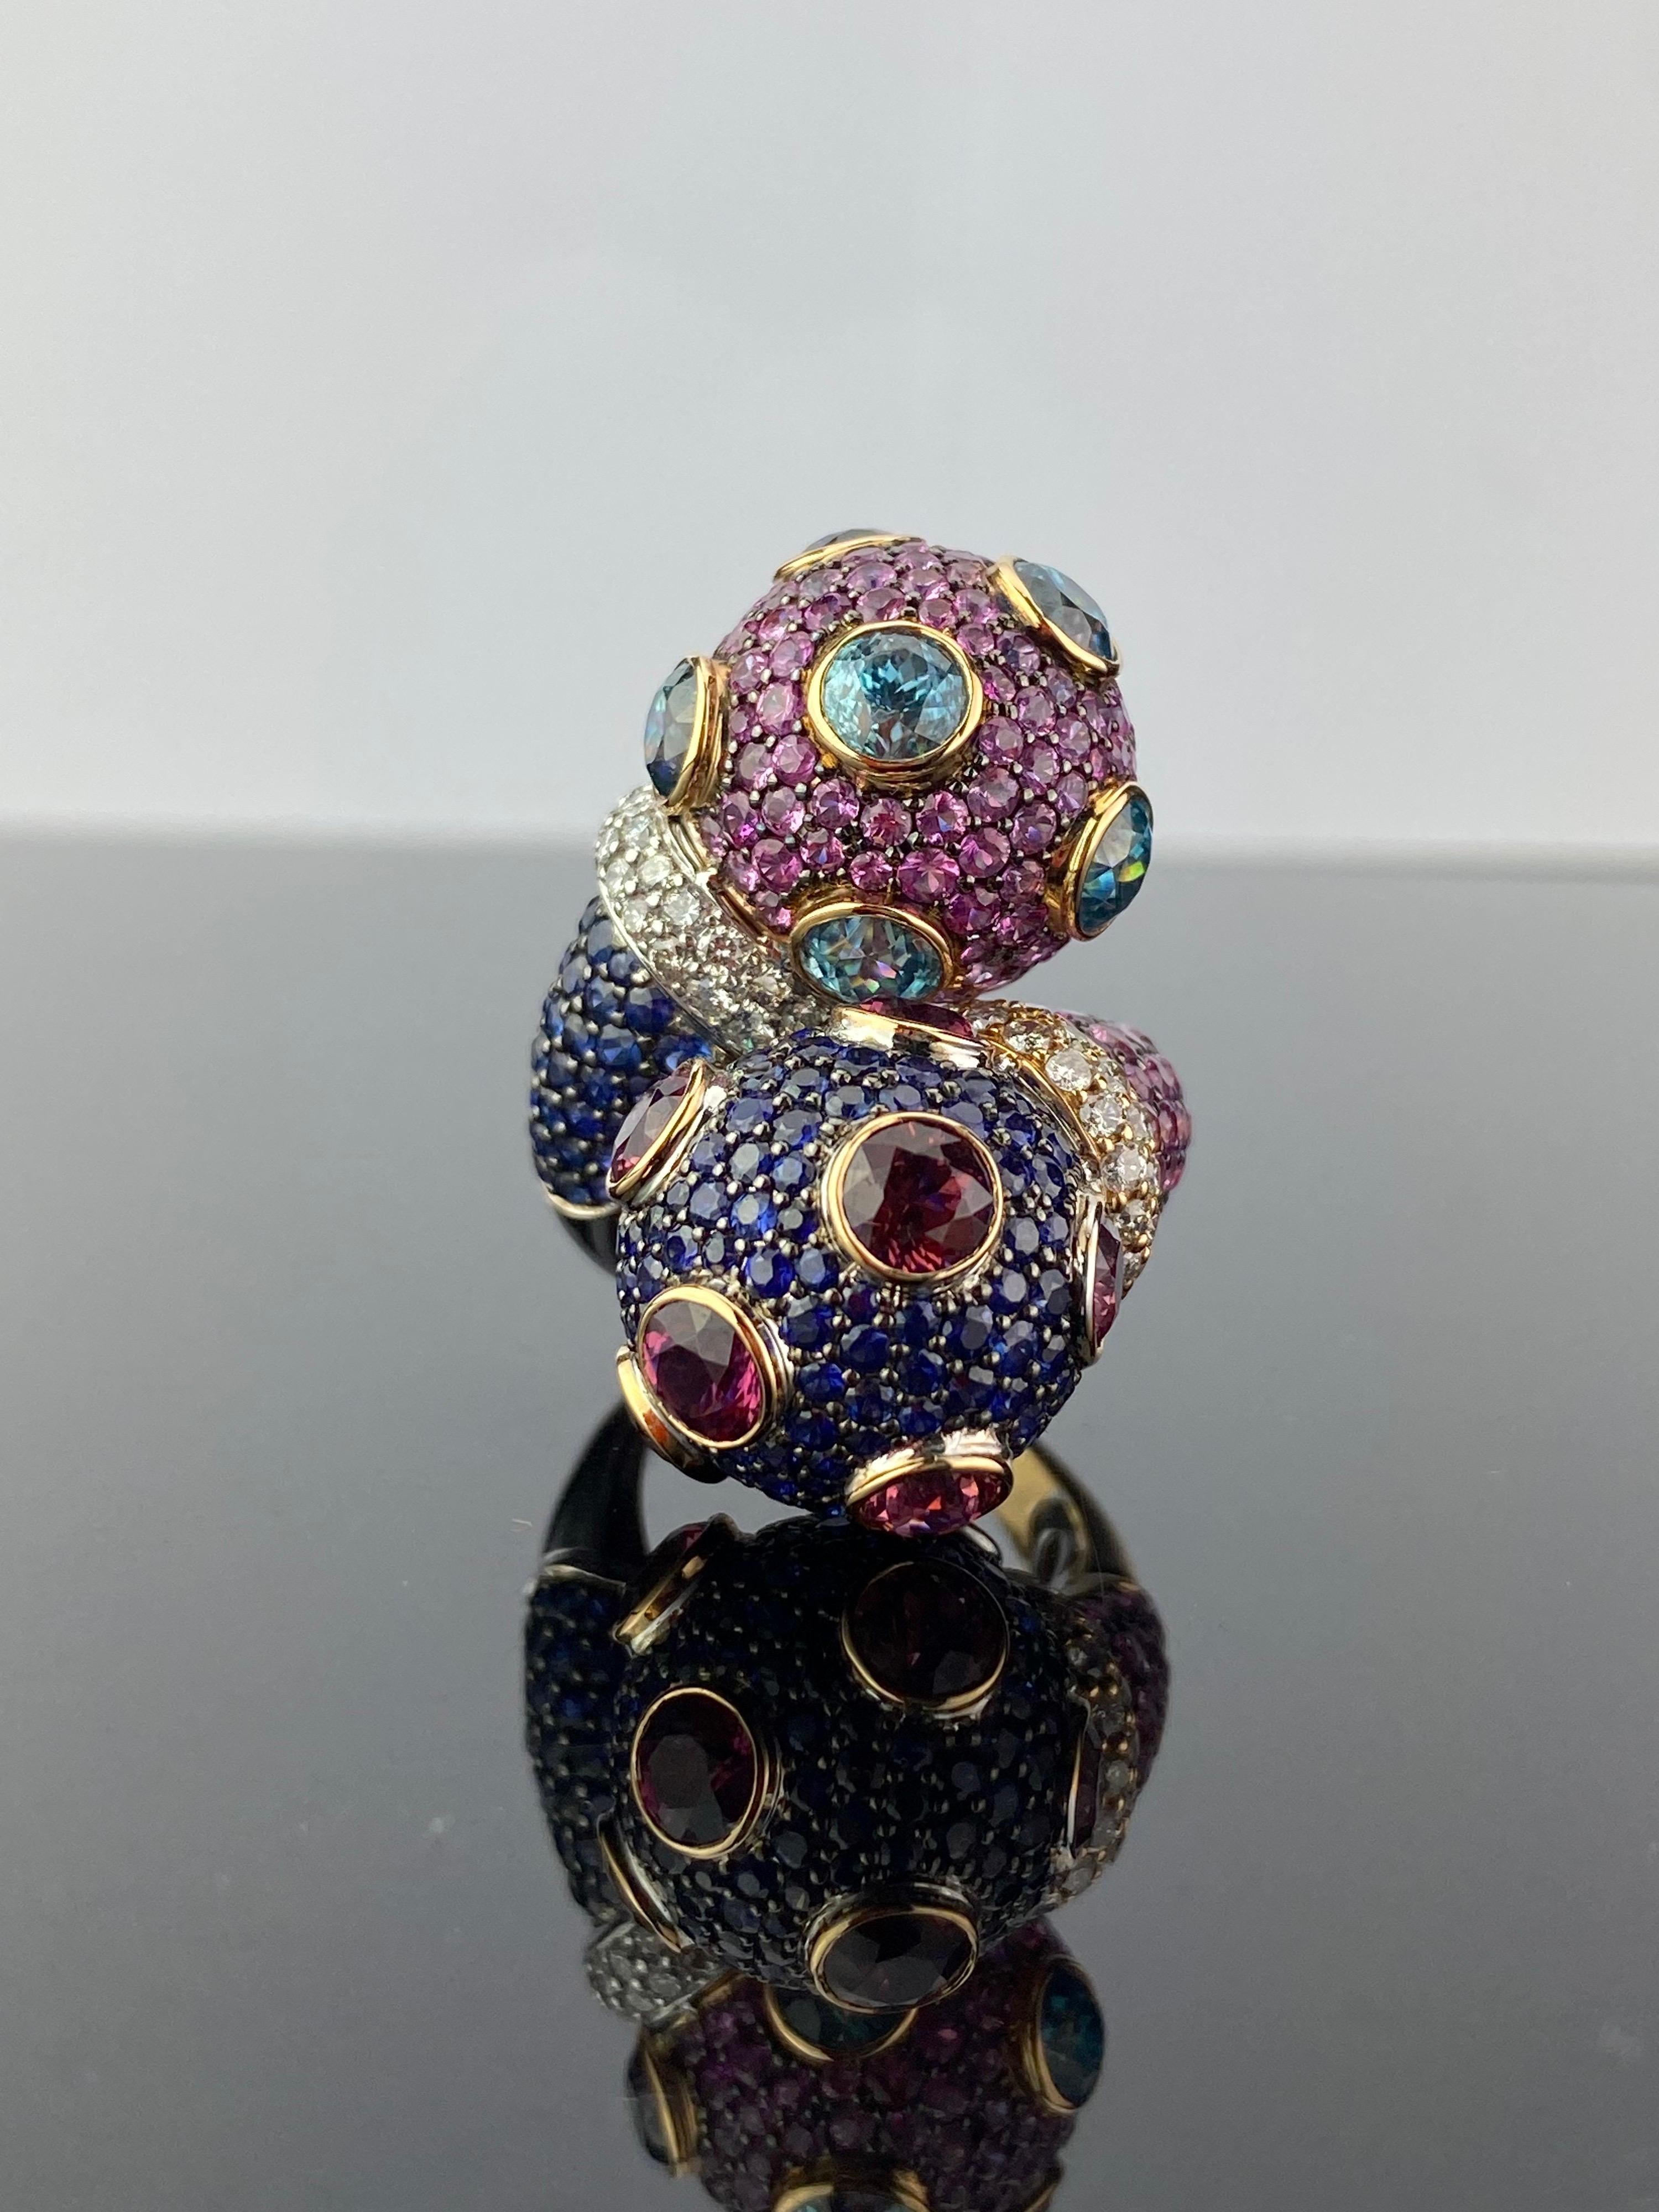 A very unique dome-shaped cocktail ring, with 5.75 carat Blue Sapphire, 5.59 carat Pink Sapphire, 10.92 carats Blue Zircon, 4.8 carat Pink Tourmaline and 1.33 carat White Diamonds all set in 23.10 grams of solid 18K White and Yellow Gold. All